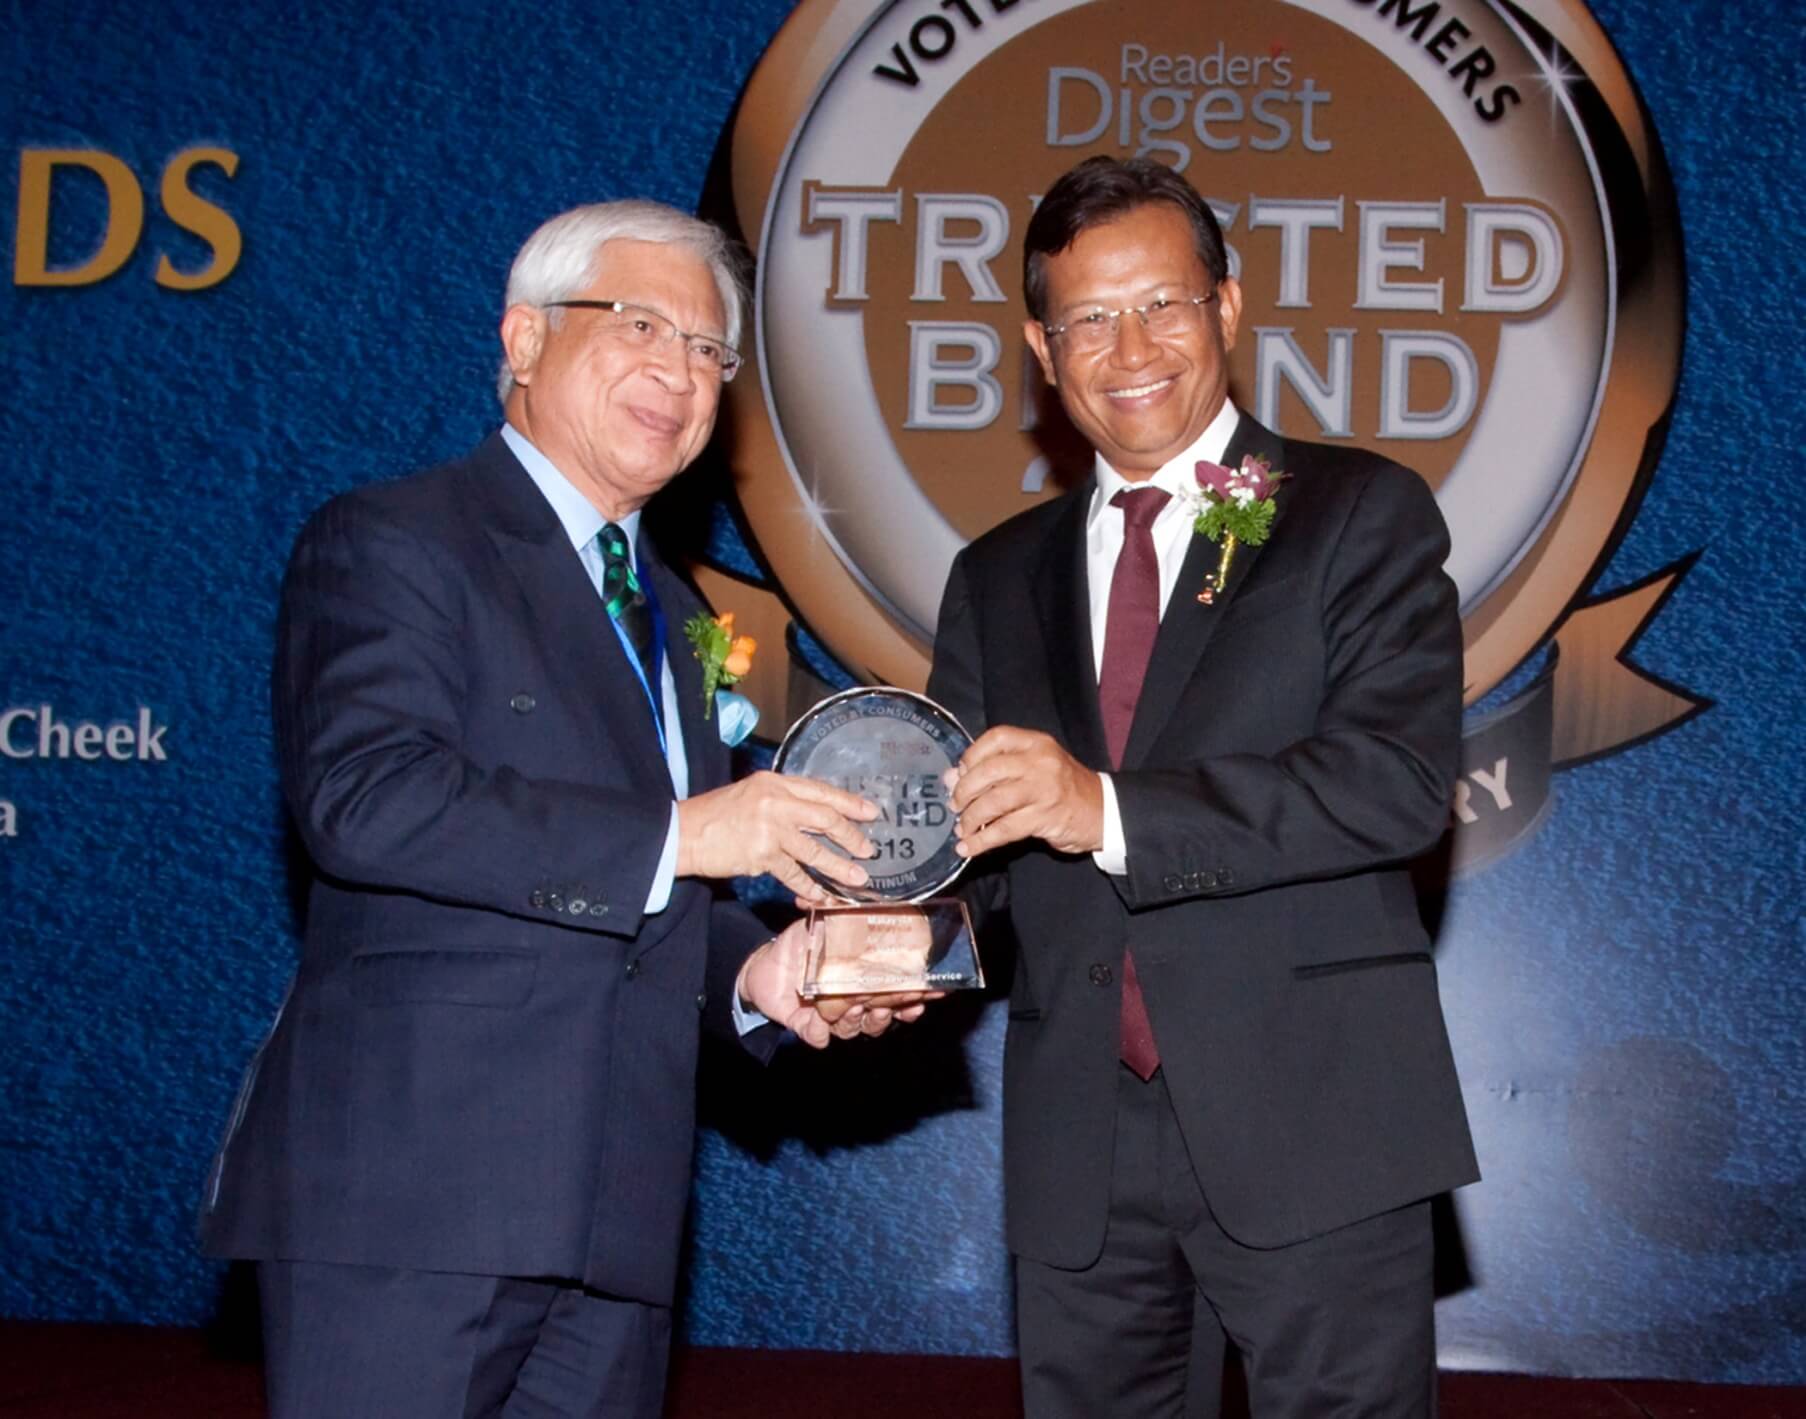 Maxis receives the Platinum Award in the Phone & Broadband Service category Win marks the sixth time Maxis has received a Reader’s Digest Trusted Brand Award Maxis continues to provide customers with the best value and experience through innovative products and services designed to enrich their lives 